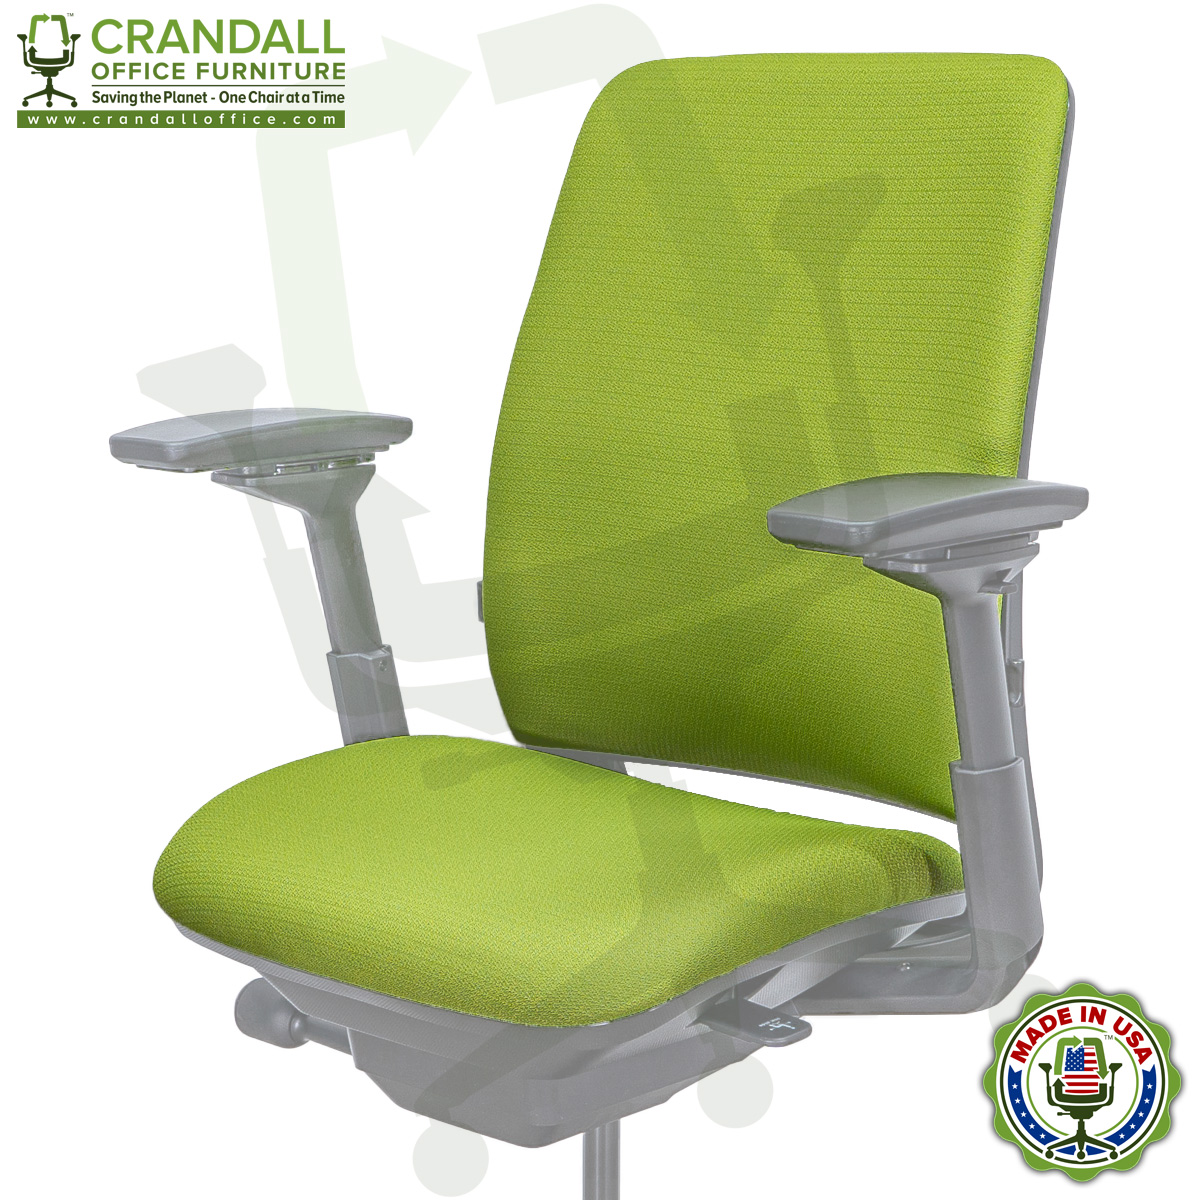 https://www.crandalloffice.com/wp-content/uploads/2022/04/Steelcase-Amia-Chair-Upholstery-by-Crandall-Office-Furniture.jpg